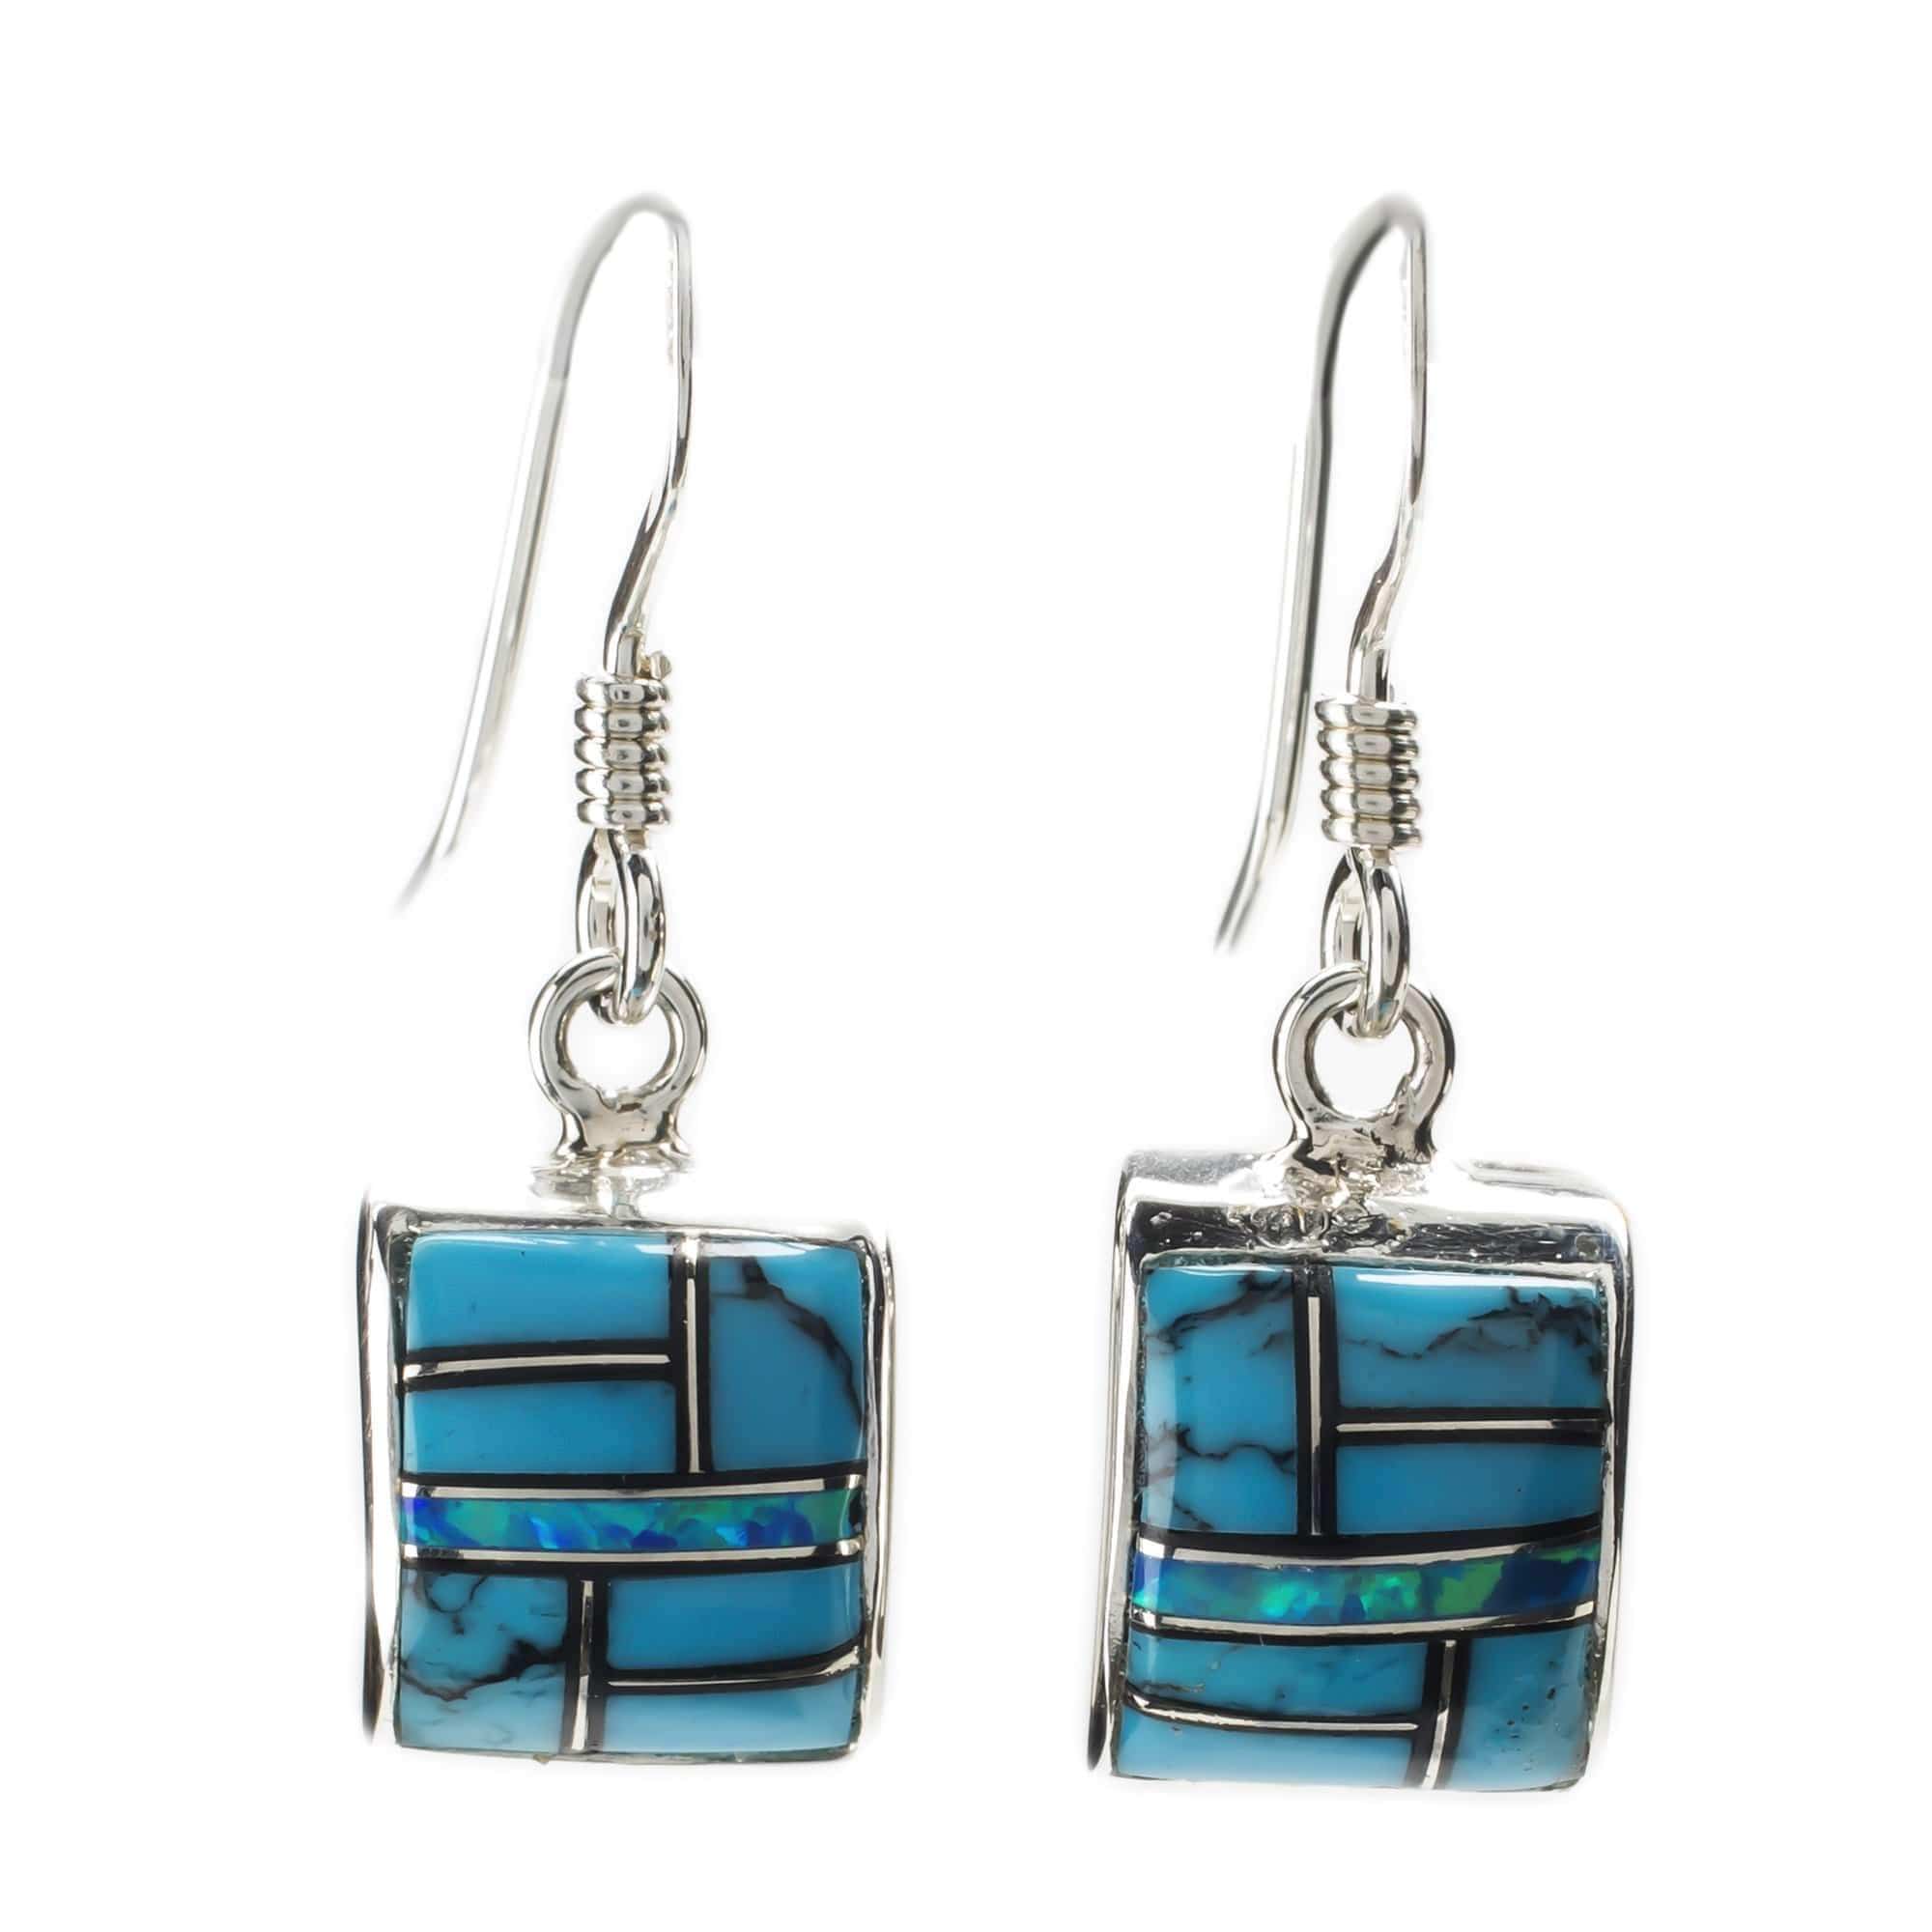 Kalifano Southwest Silver Jewelry Turquoise Square 925 Sterling Silver Earring with French Hook USA Handmade with Aqua Opal Accent NME.1116.TQ